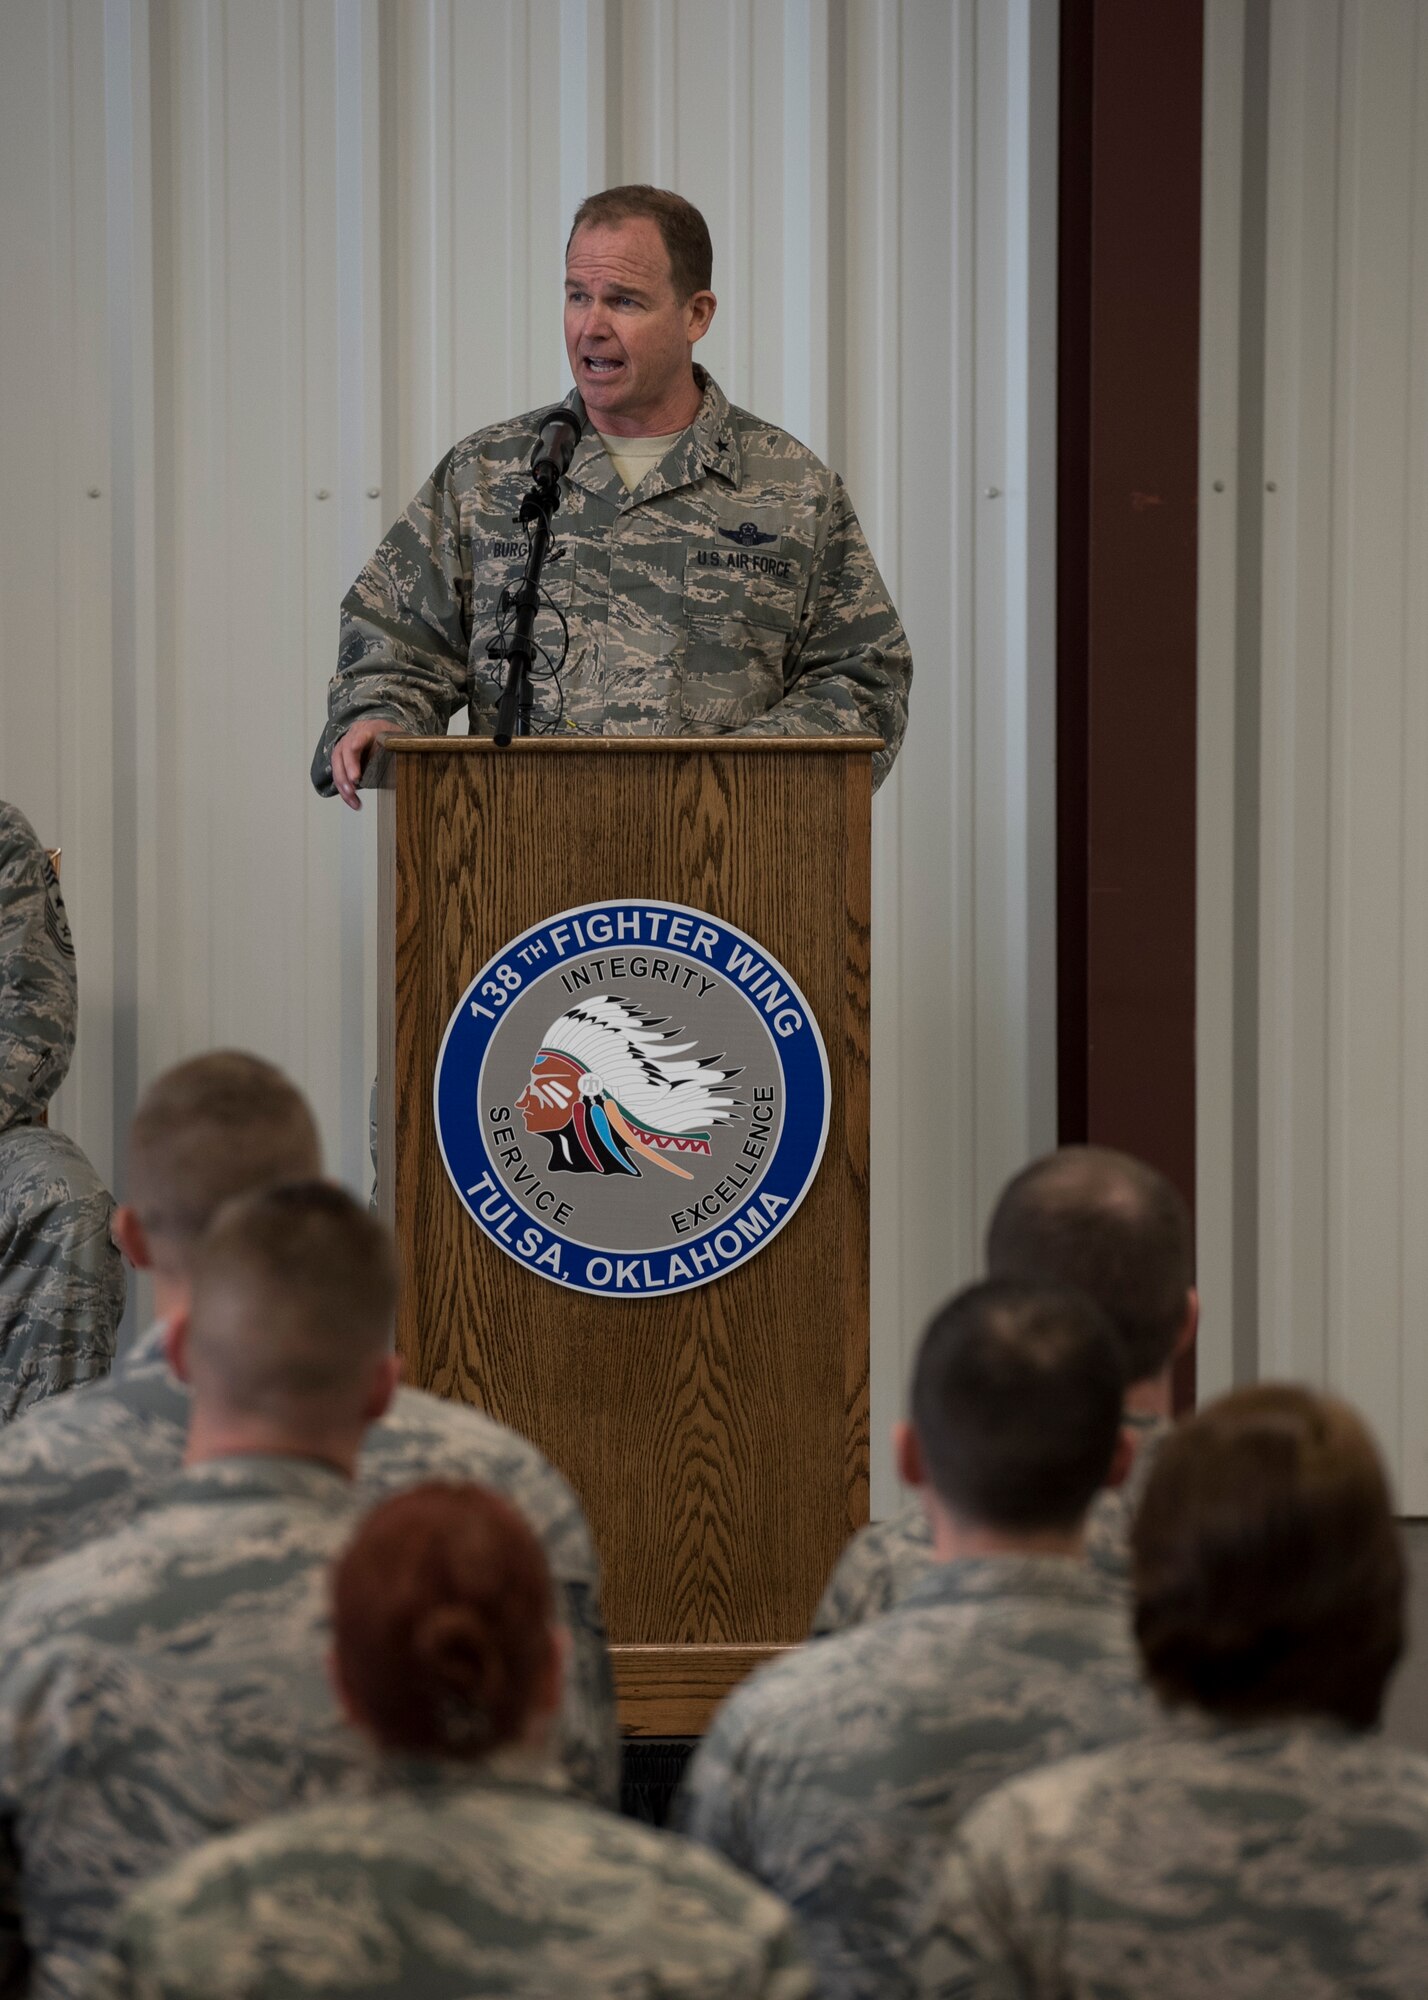 Brigadier General David Burgy, Chief of Staff of the Oklahoma Air National Guard speaks during a homecoming ceremony at the 138th Fighter Wing in Tulsa, Okla., March 5, 2017. More than 90 Airmen deployed from 12 squadrons across the 138th FW. (U.S. Air National Guard photo by Senior Airman Rebecca Imwalle)